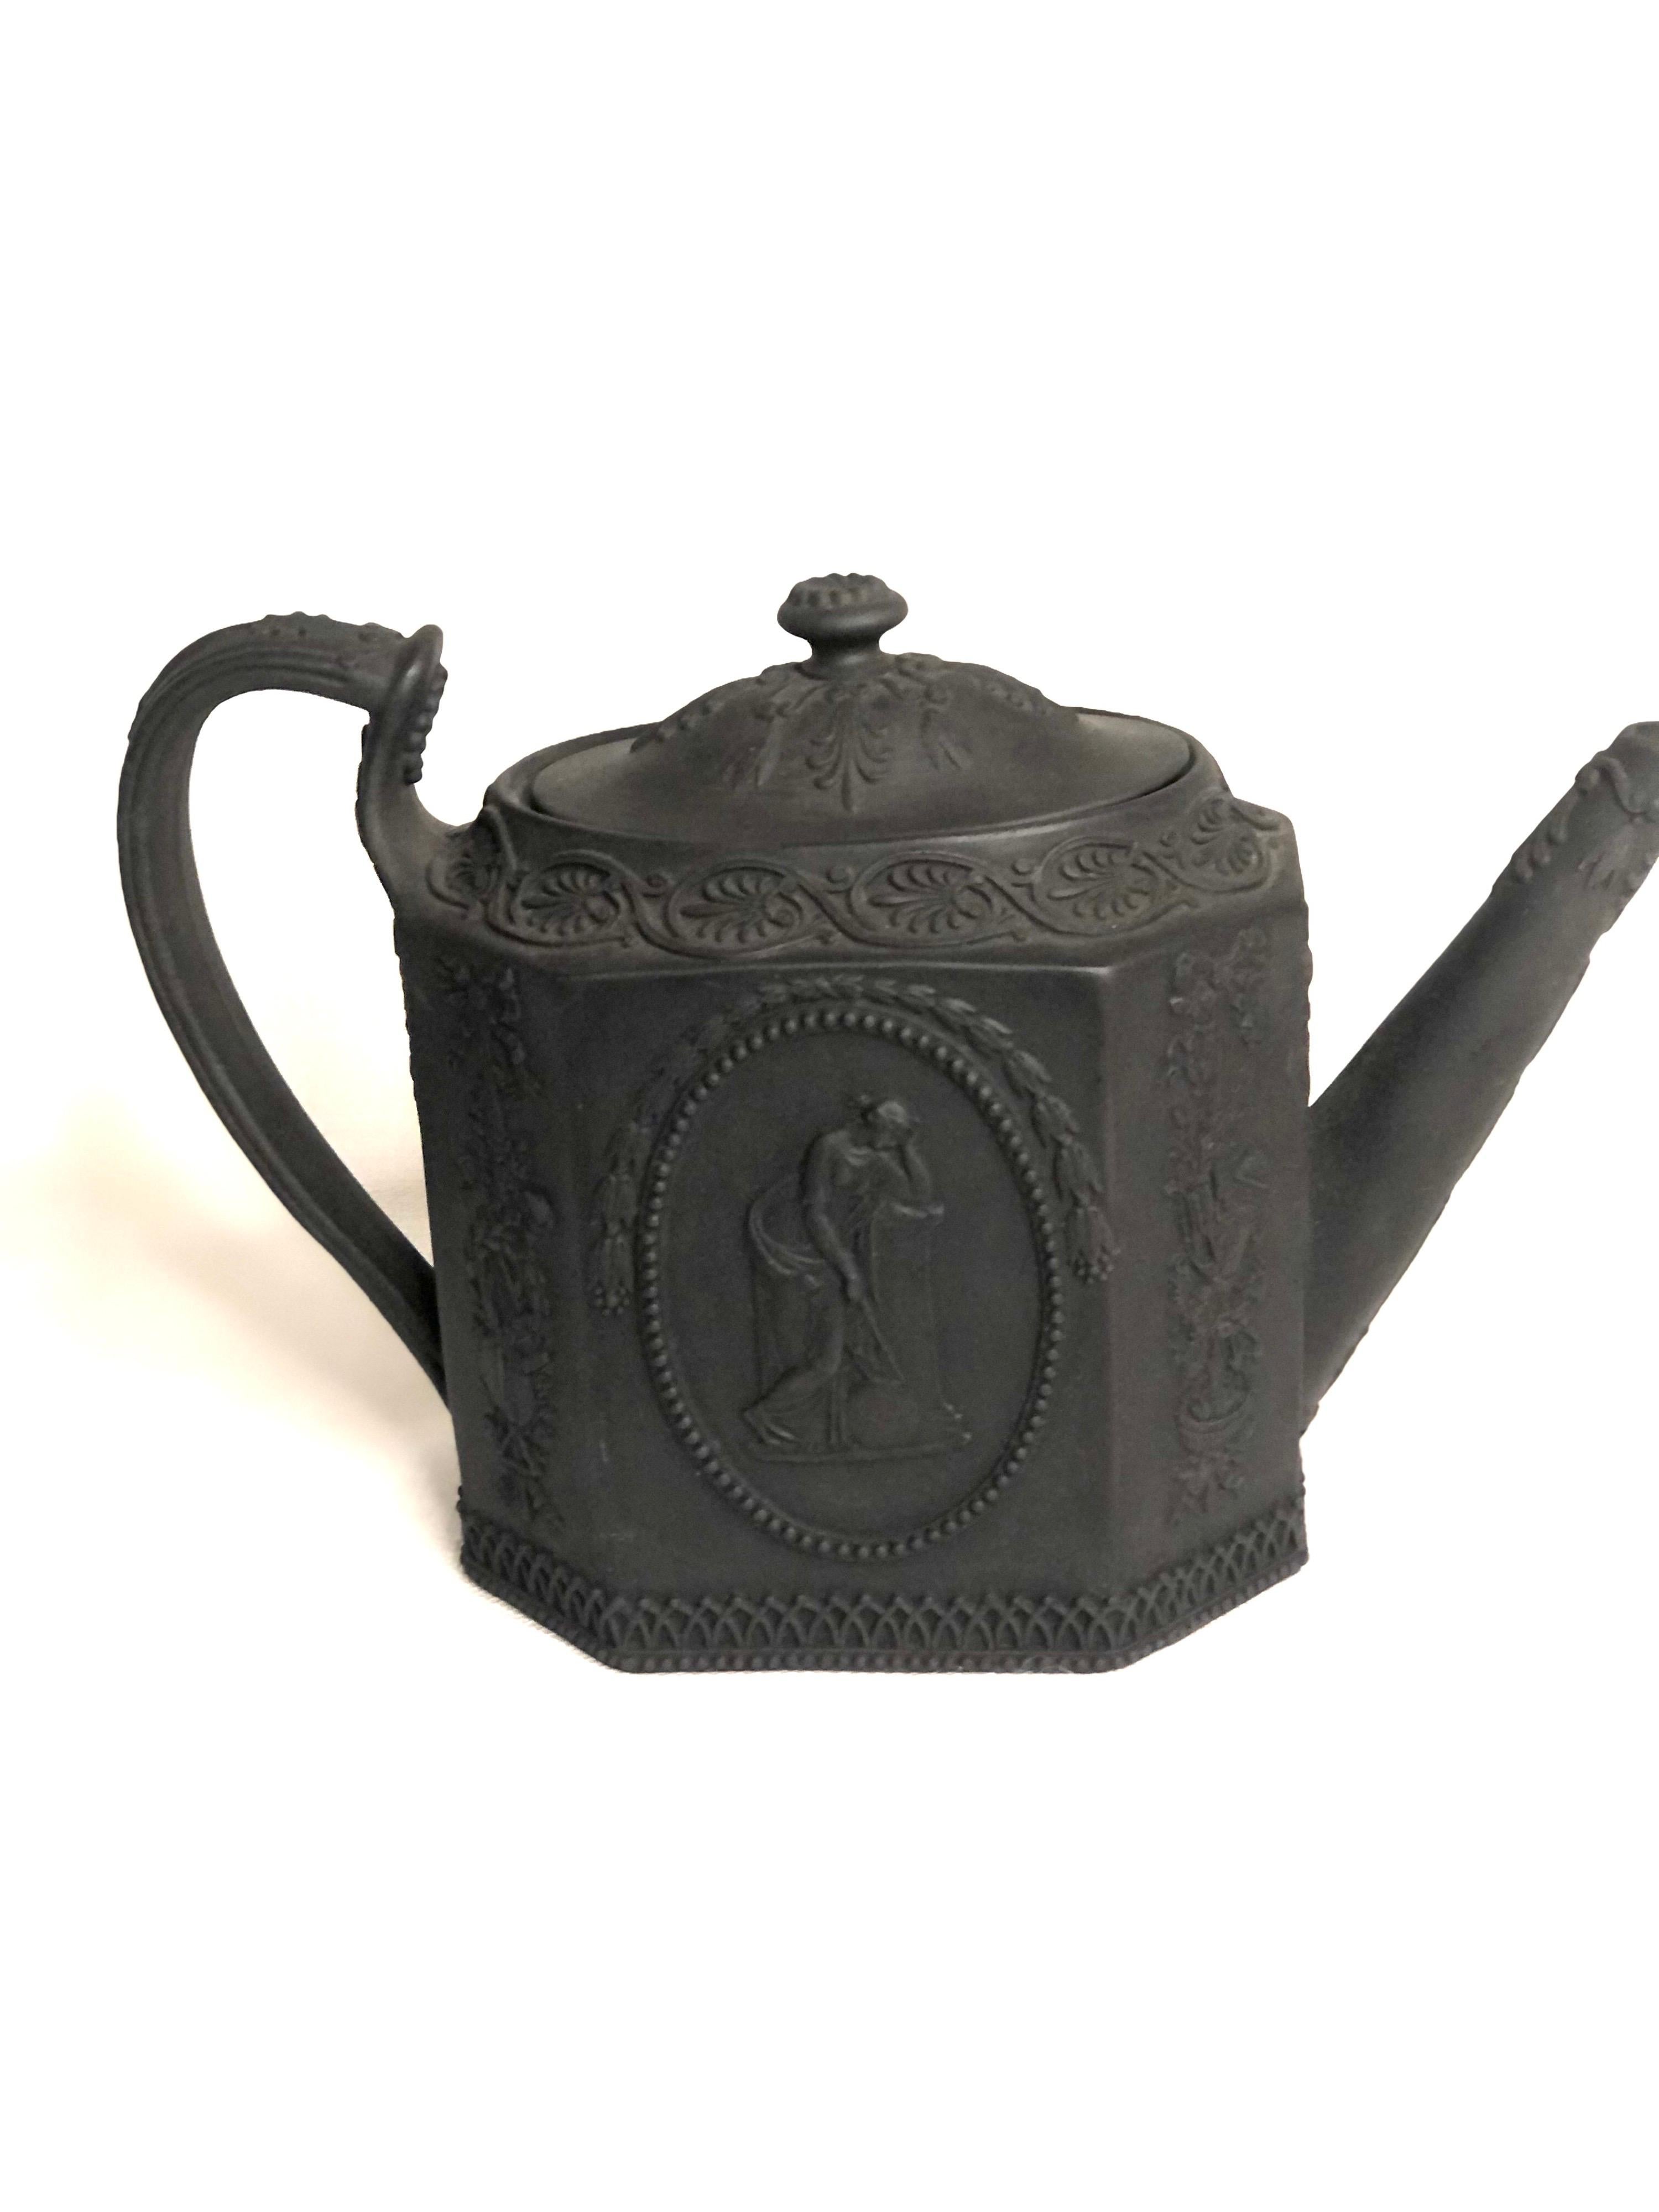 Basalt Wedgwood Teapot with Medallions of Man with Lyre and Lady on Pedestal For Sale 4